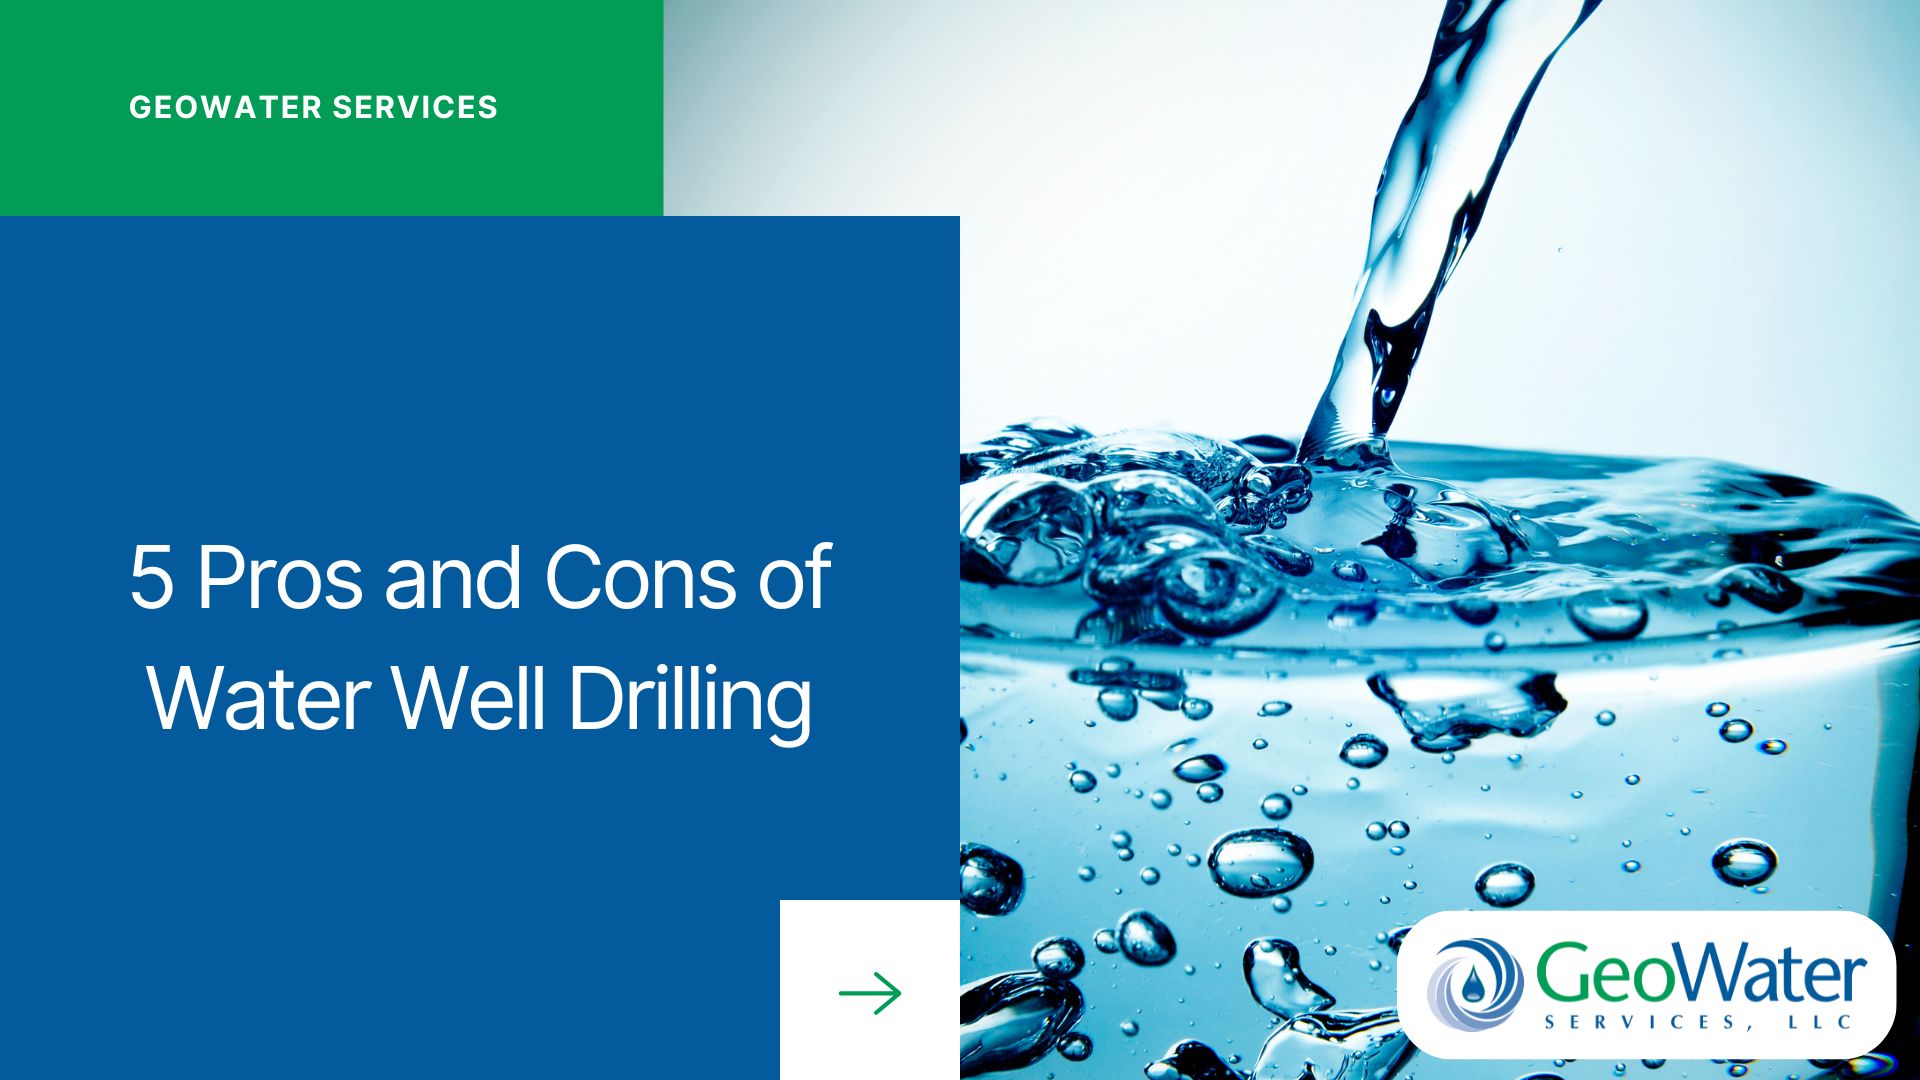 5 Pros and Cons of Water Well Drilling